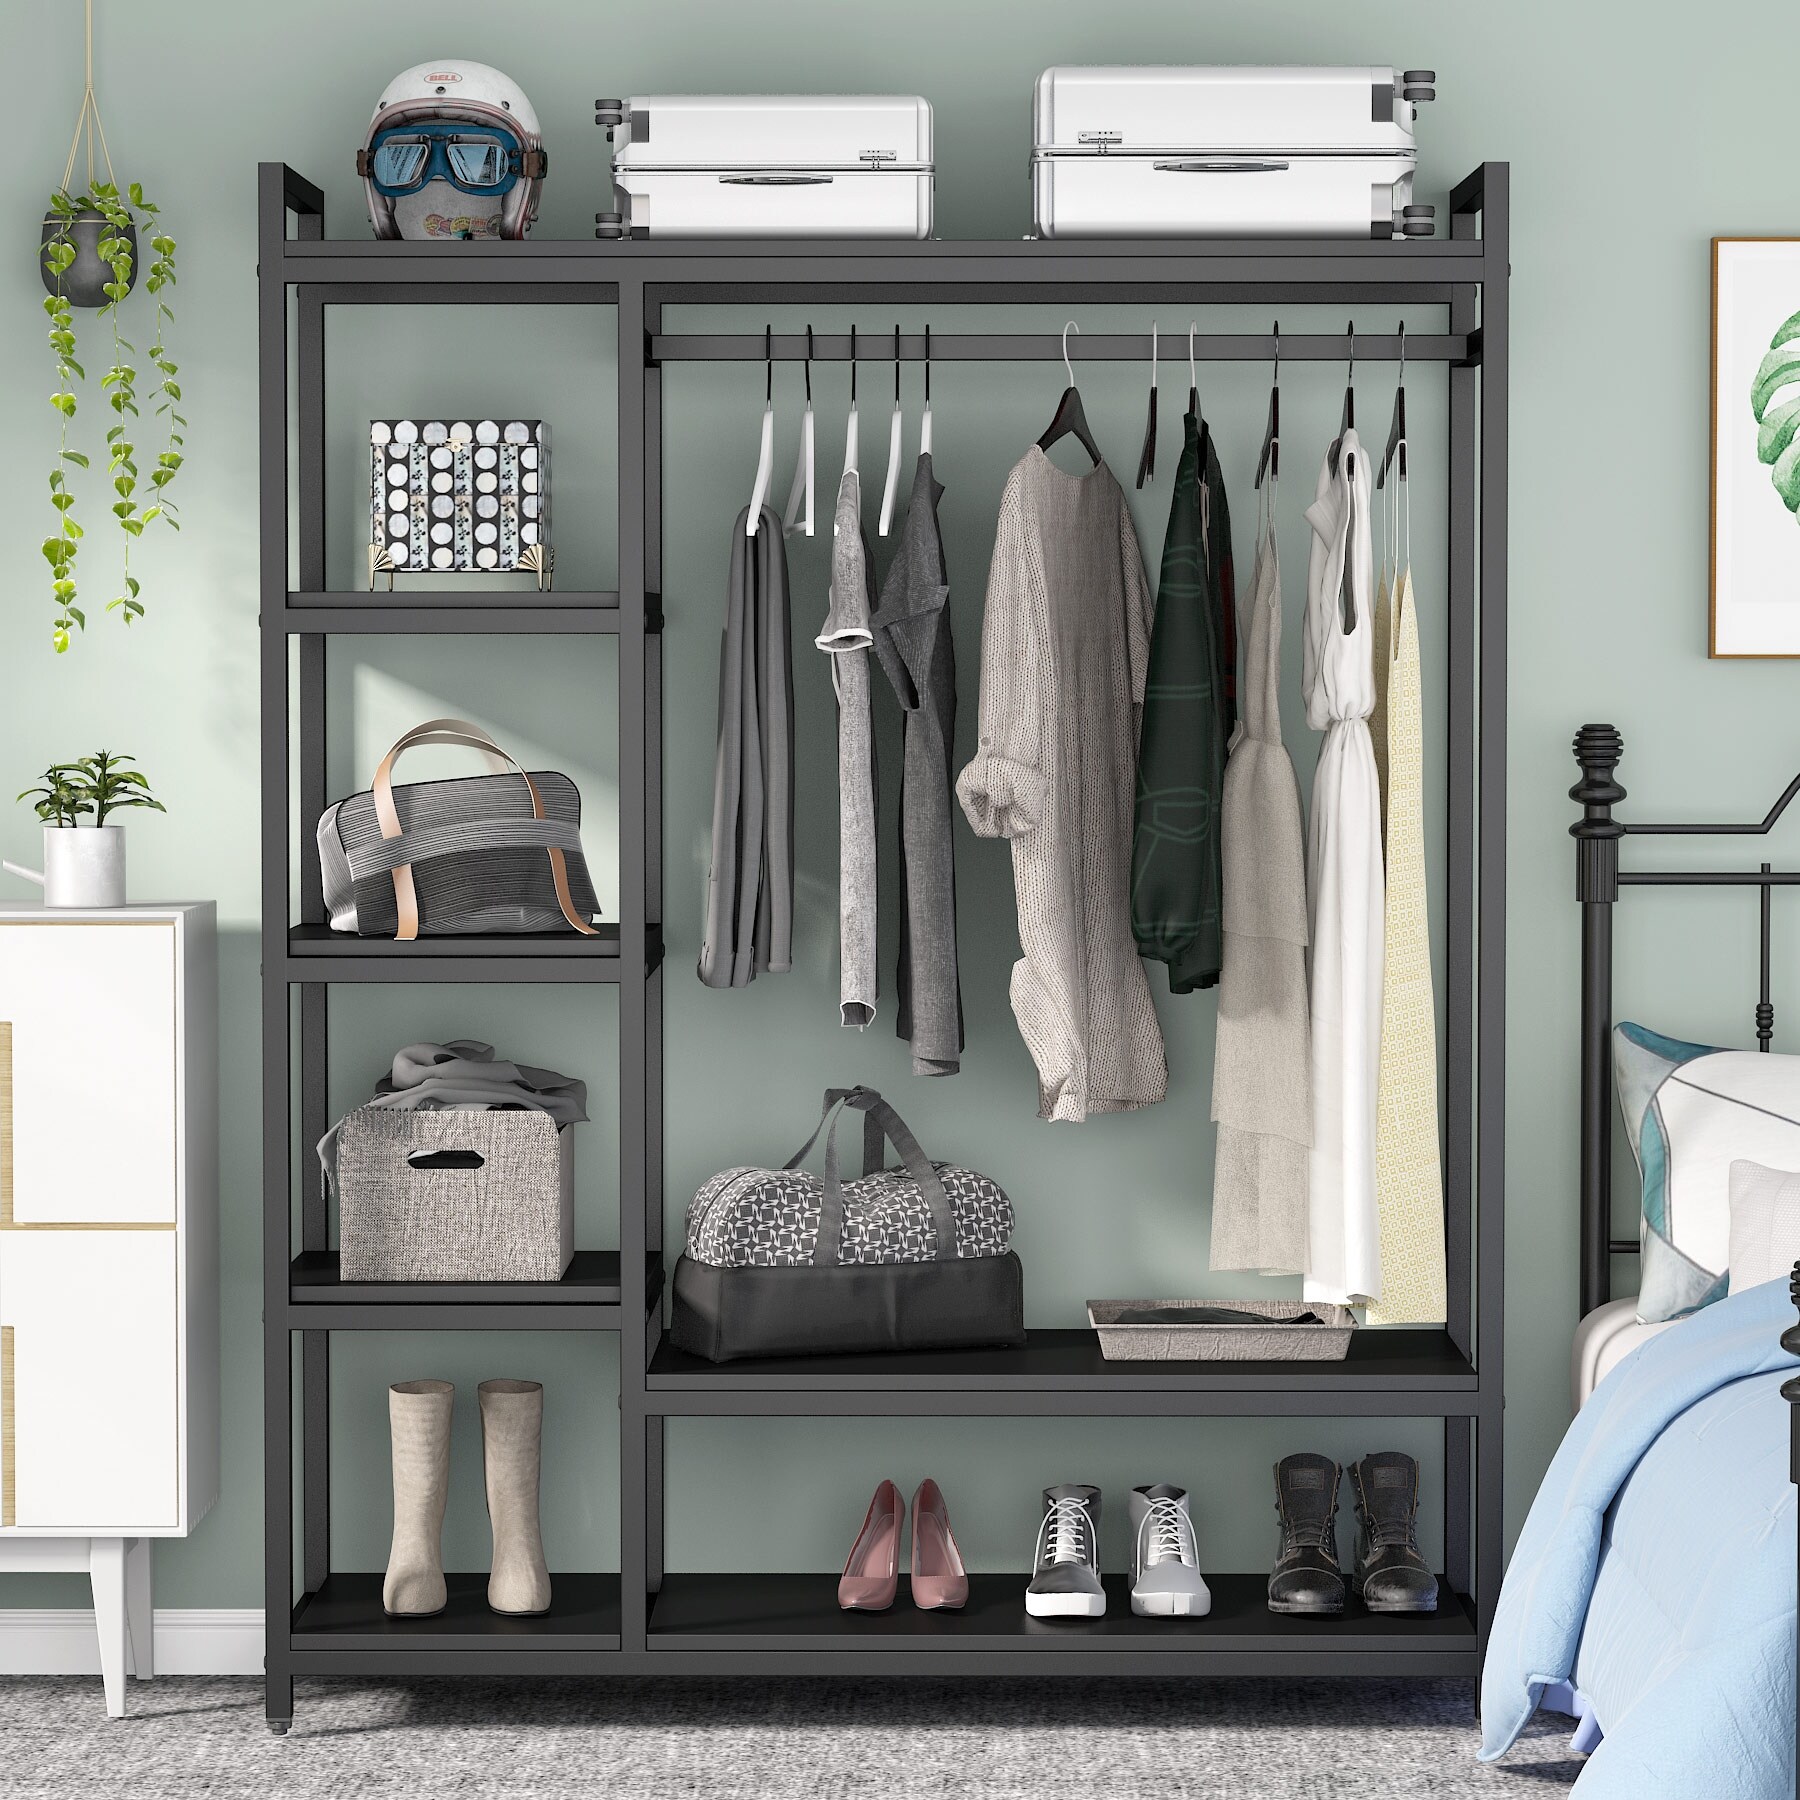 https://ak1.ostkcdn.com/images/products/is/images/direct/6027fb83464fb4ff50dffb7cad36535a9f7bc34e/Free-standing-Closet-Organizer-Garment-Rack-with-6-Shelf-1-Hanging-Bar.jpg